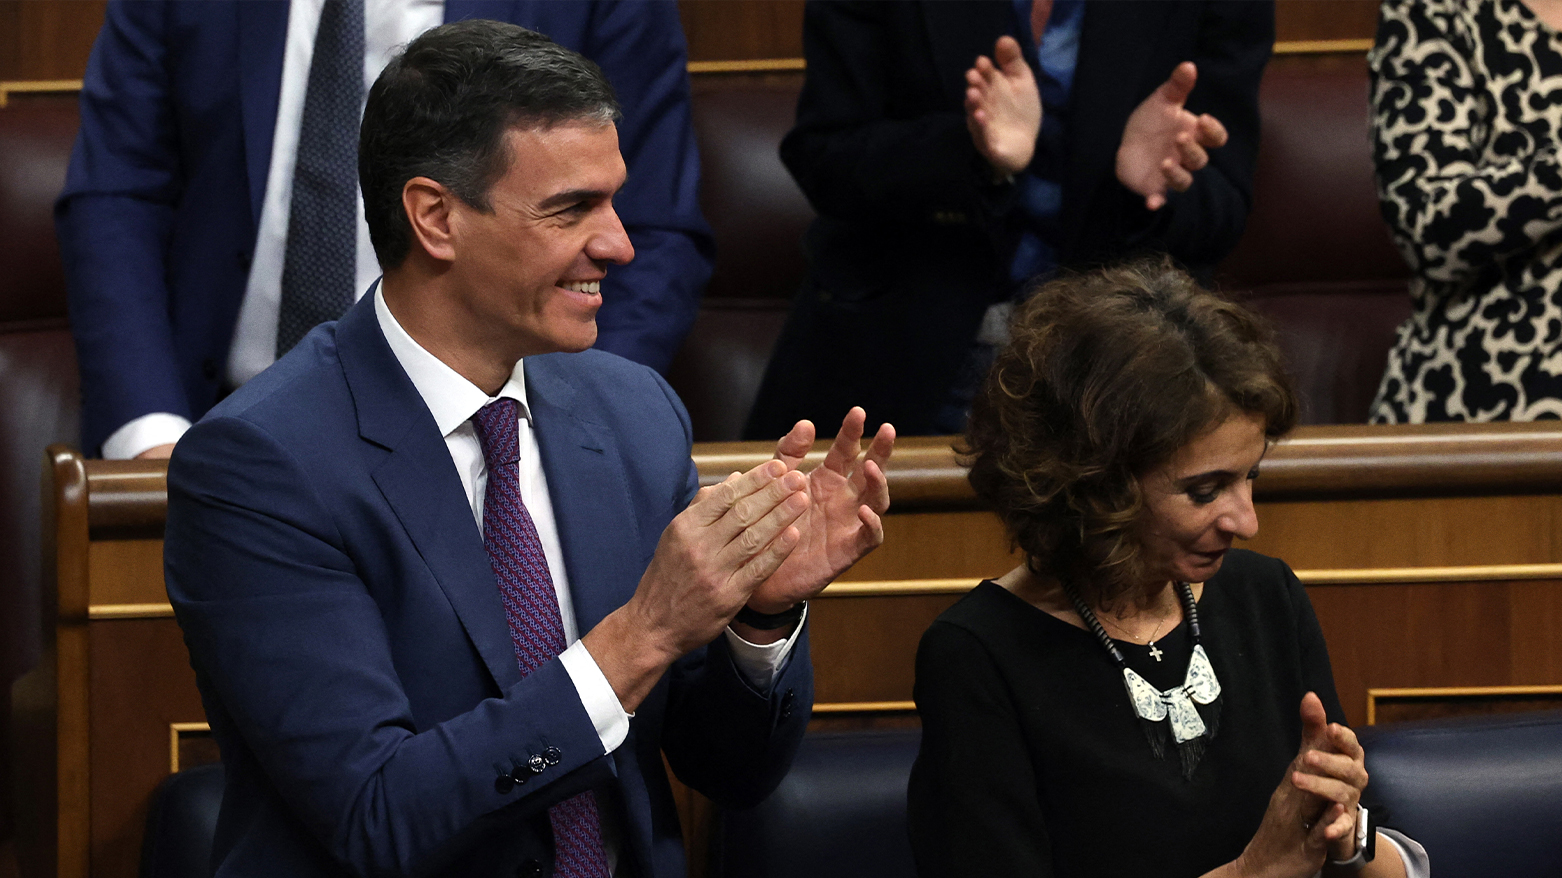 Spanish PM Sanchez and Budget Minister Montero Applaud New Amnesty Law for 2017 Catalan Referendum Figures. (Photo: AFP)